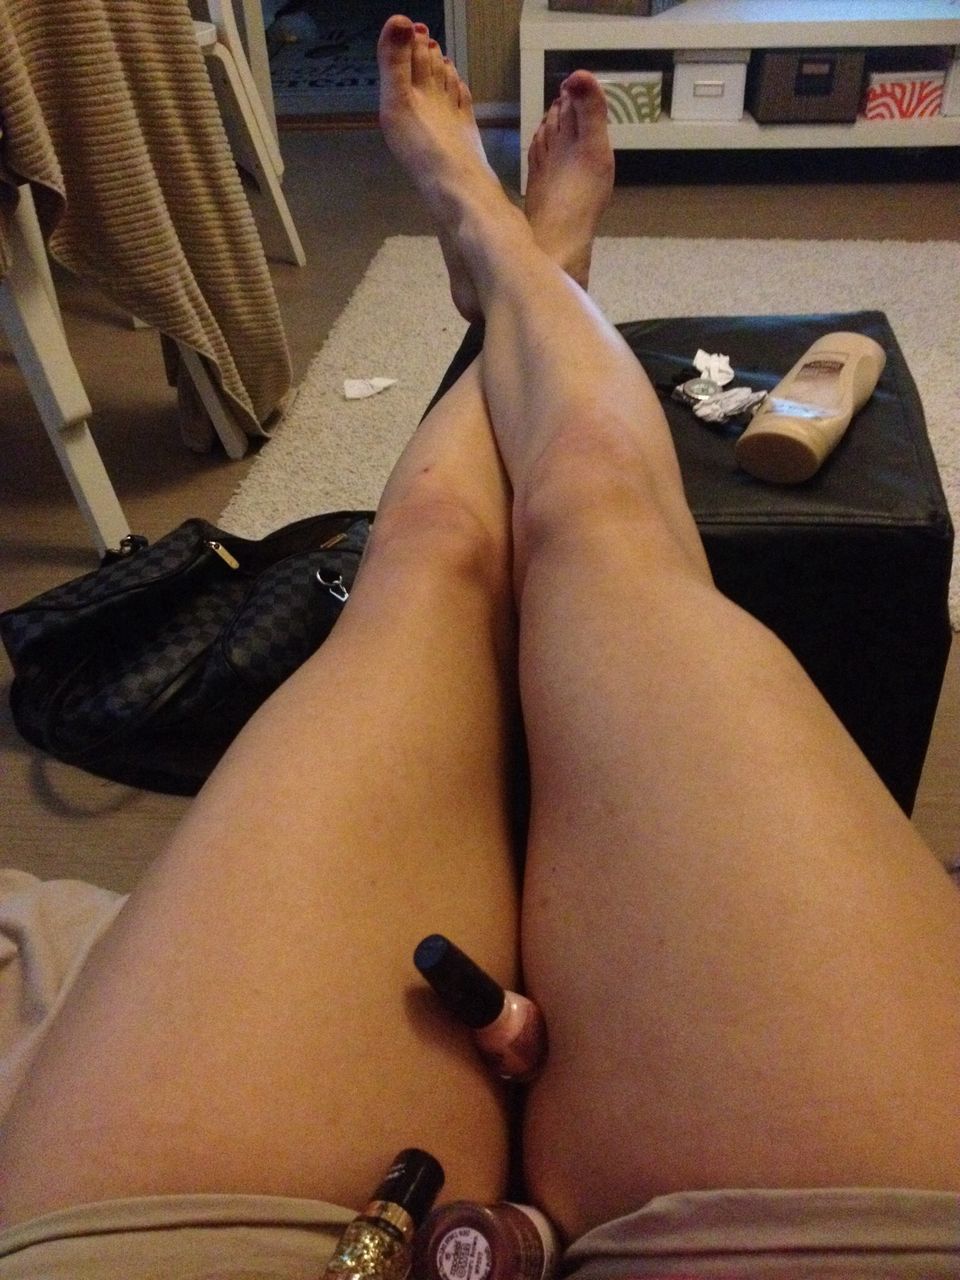 person, low section, lifestyles, part of, sitting, indoors, relaxation, barefoot, human foot, personal perspective, leisure activity, legs crossed at ankle, cropped, lying down, human finger